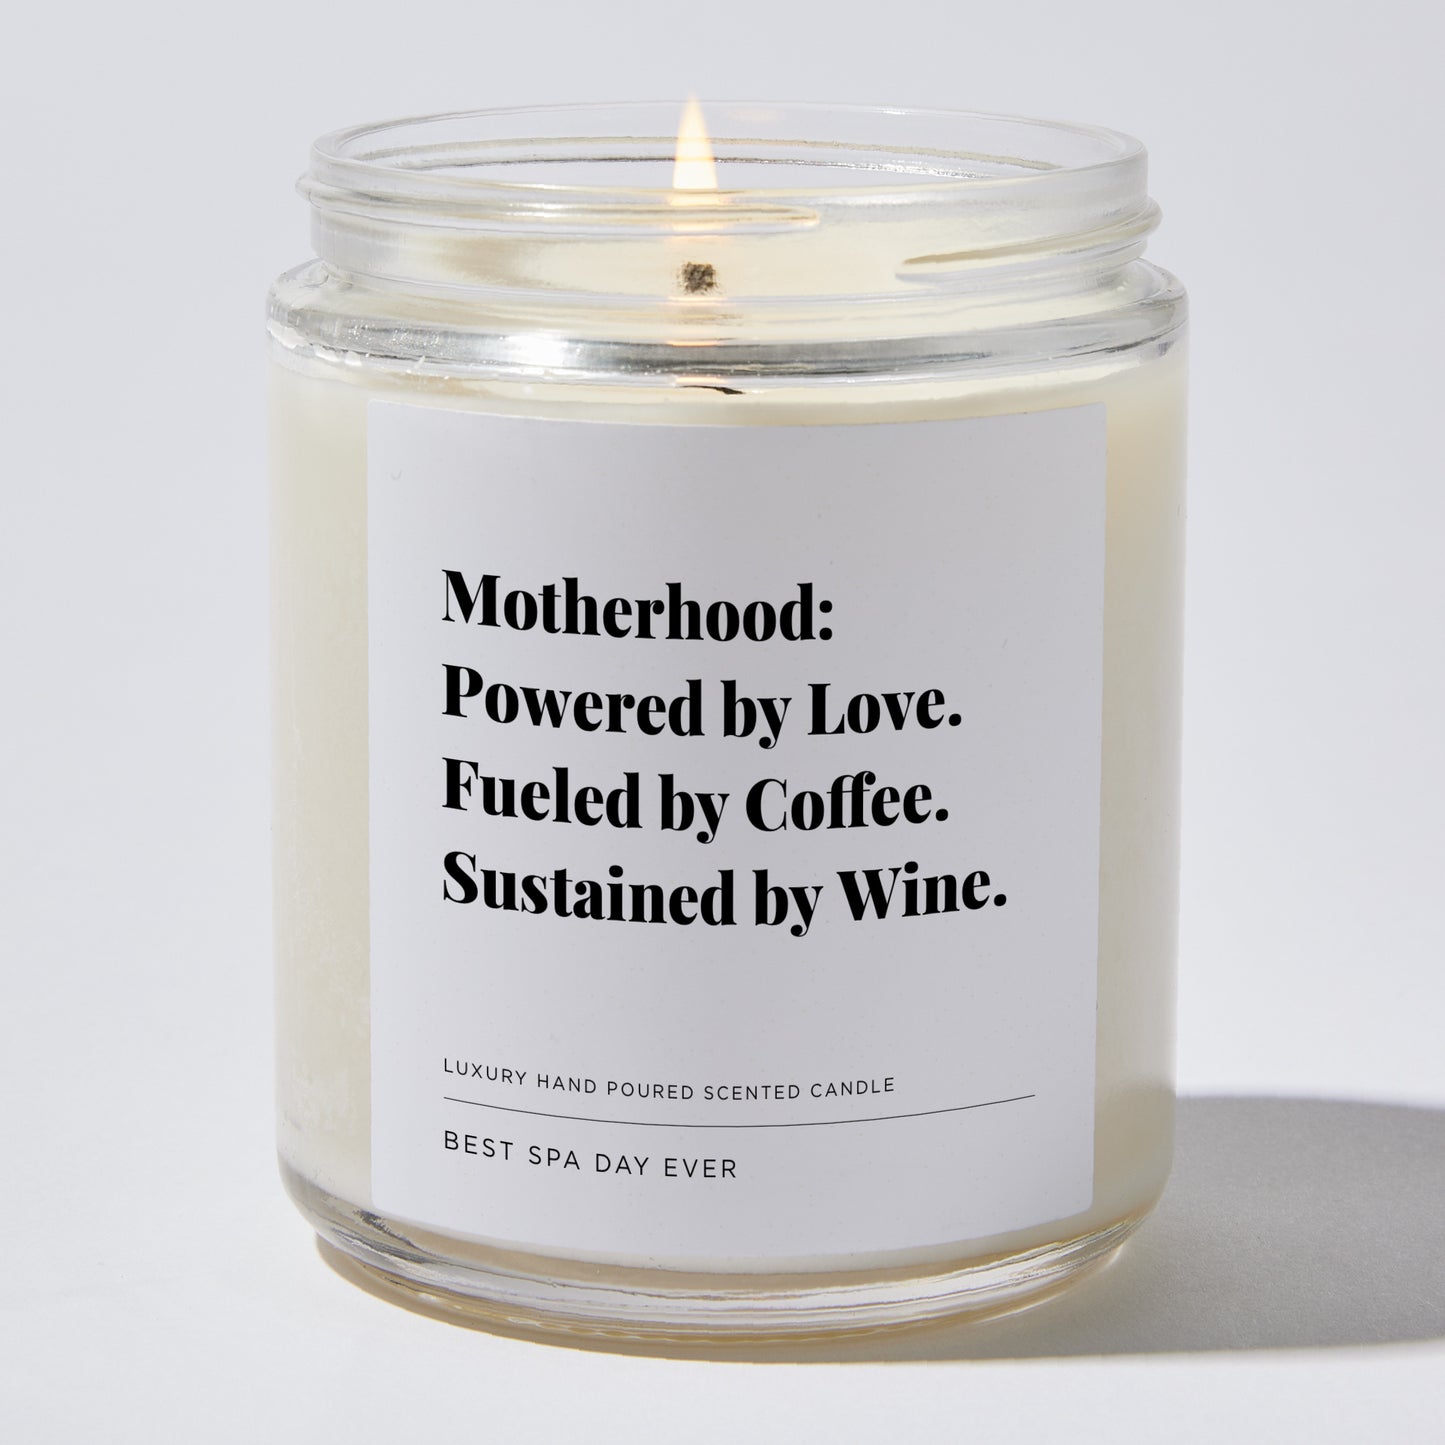 Gift for Mom - Motherhood: Powered by love. Fueled by coffee. Sustained by wine. - Candle